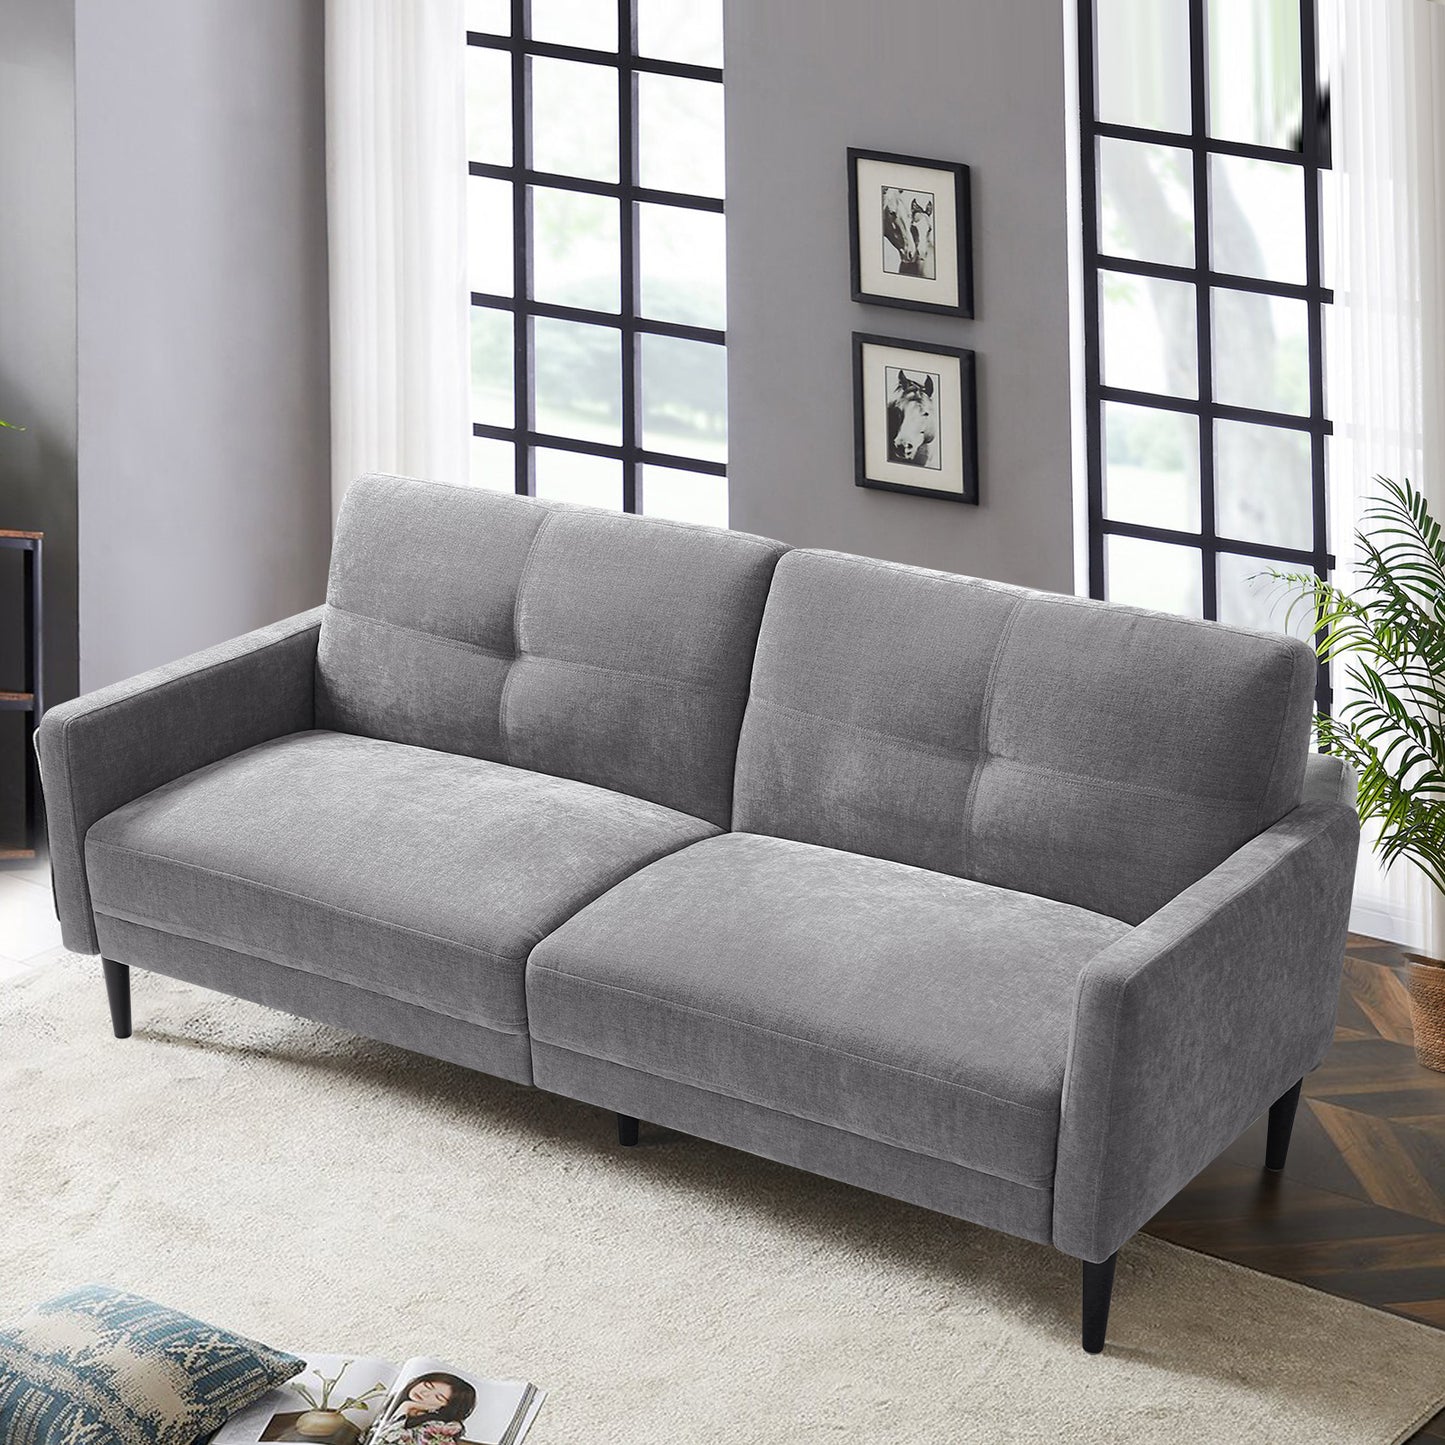 Grey Sofa Loveseat/Modern Couch with Solid Wood Frame/Easy,Soft and Comfortable,Tool-Free Assembly